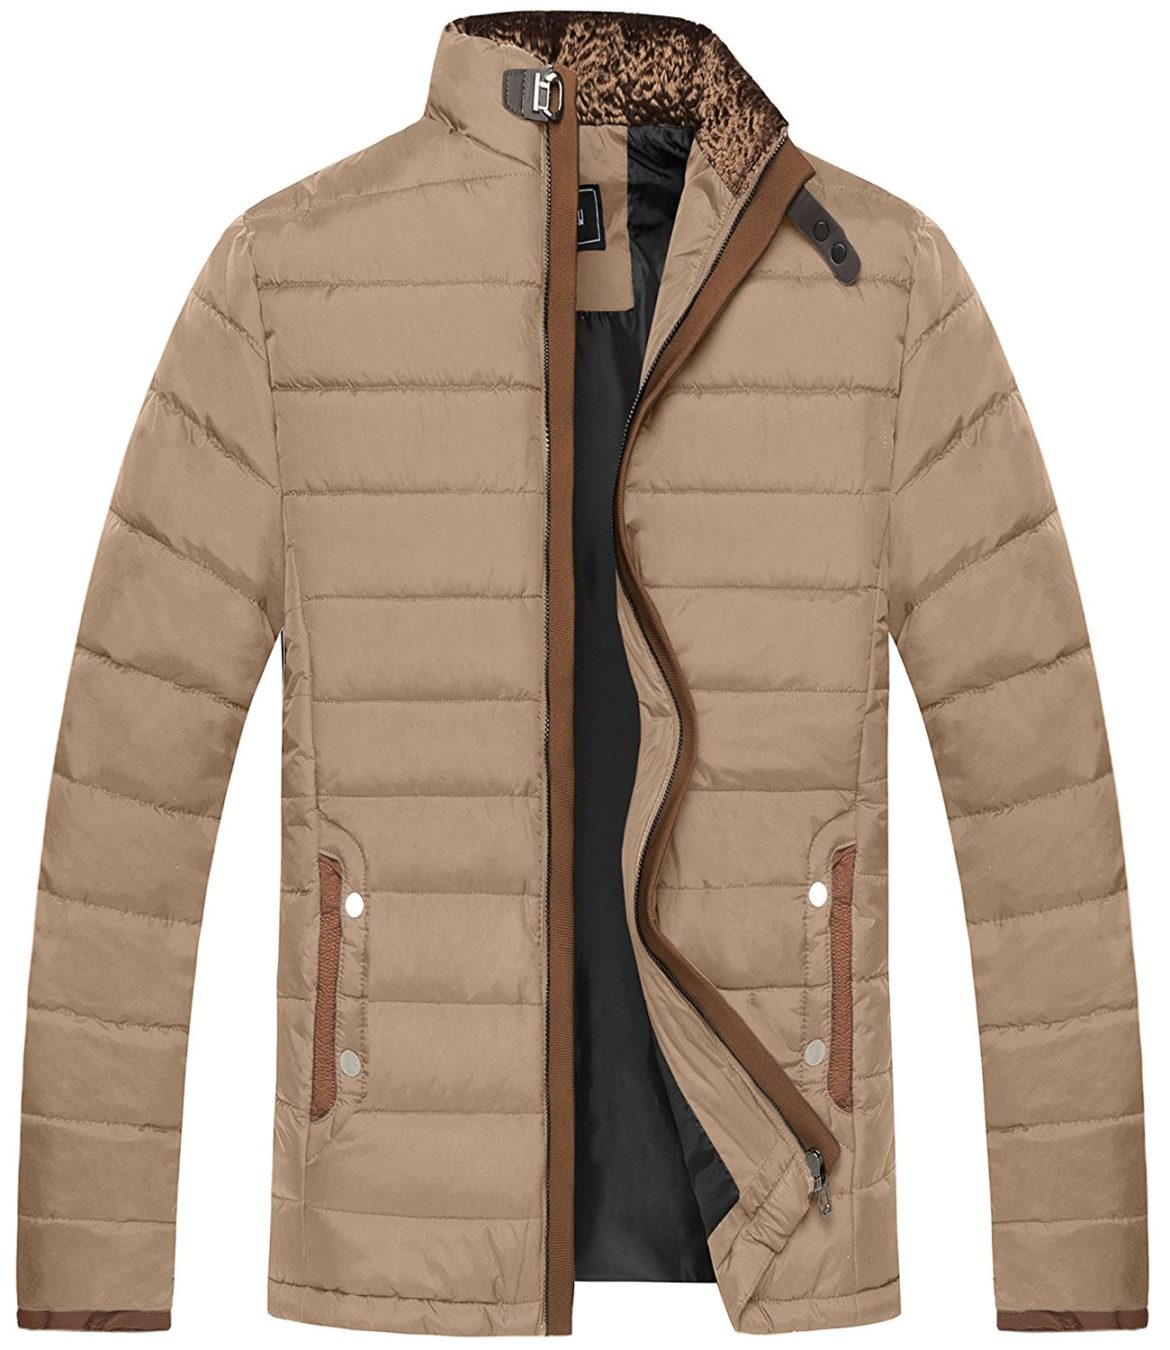 ZSHOW Men’s Winter Thicken Cotton Quilted Jacket Cotton-padded Jacket ...